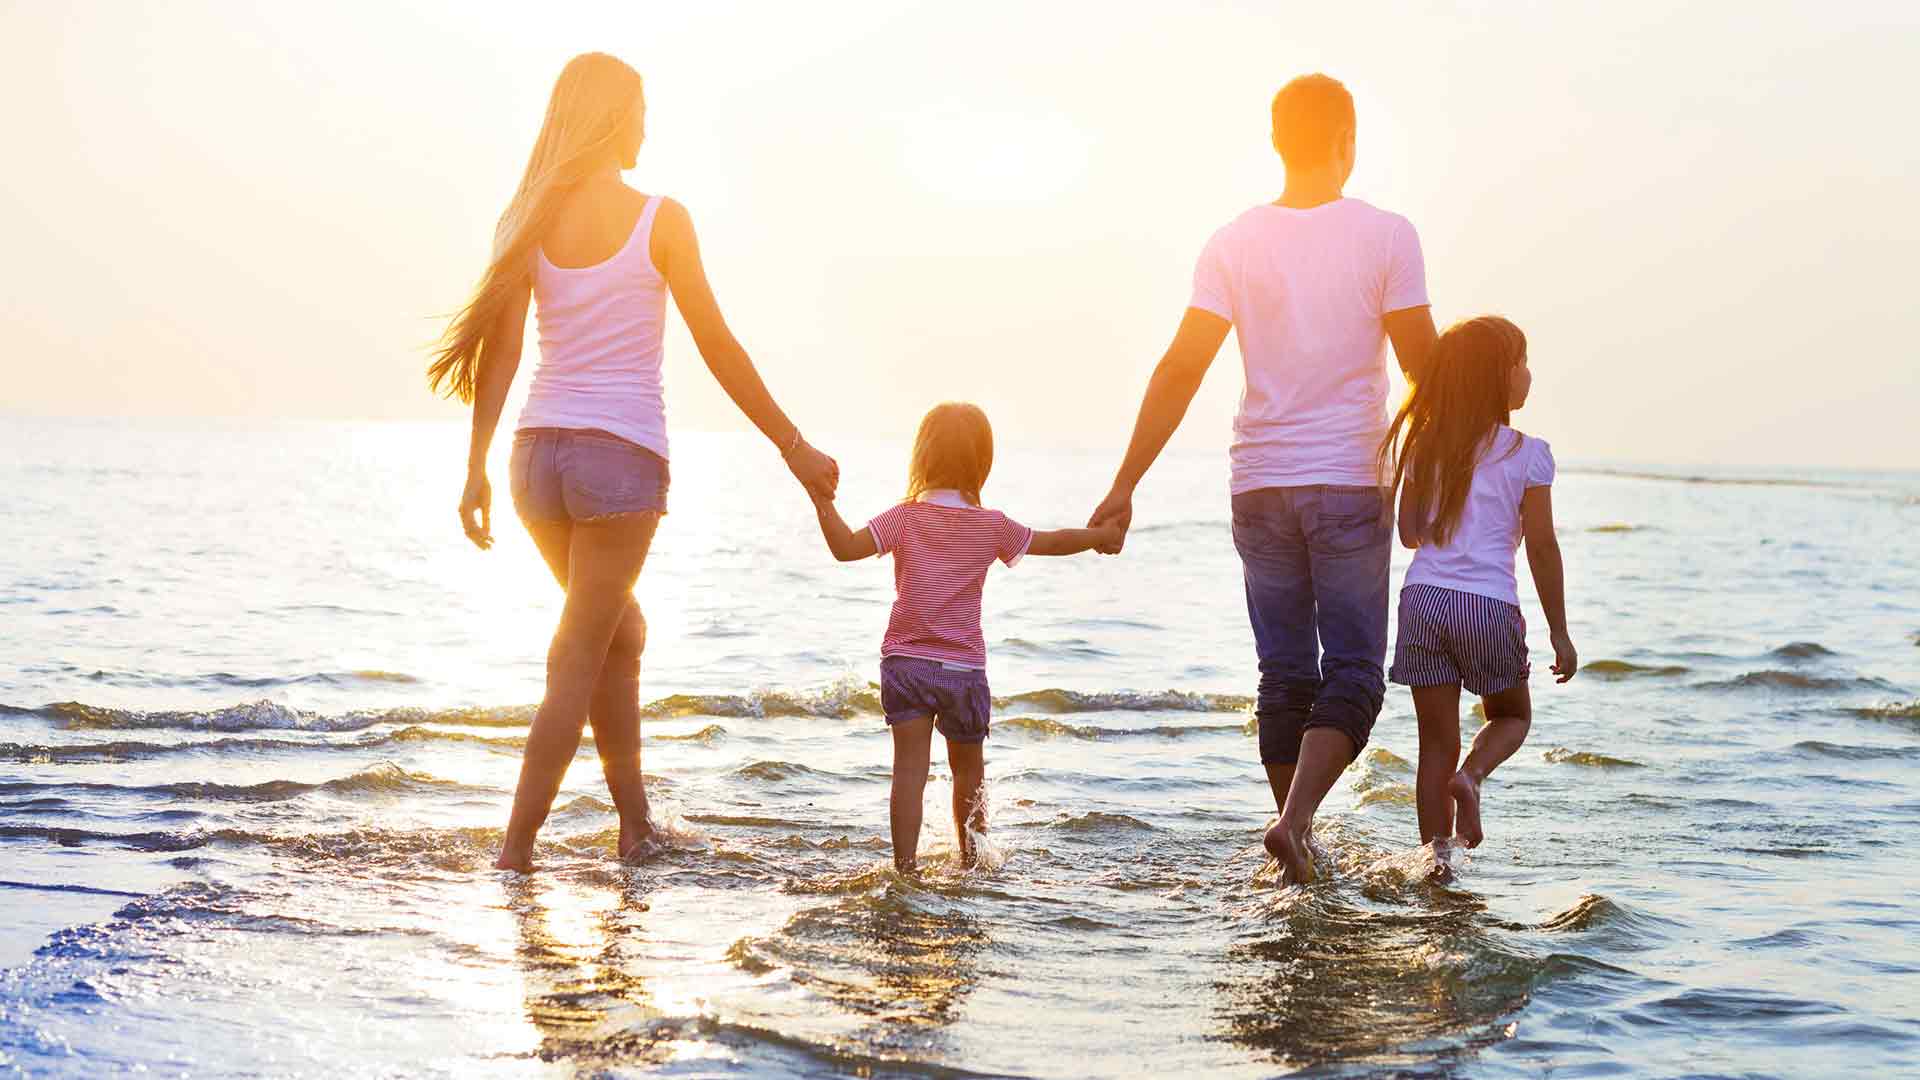 Family walking on the beach during sunset